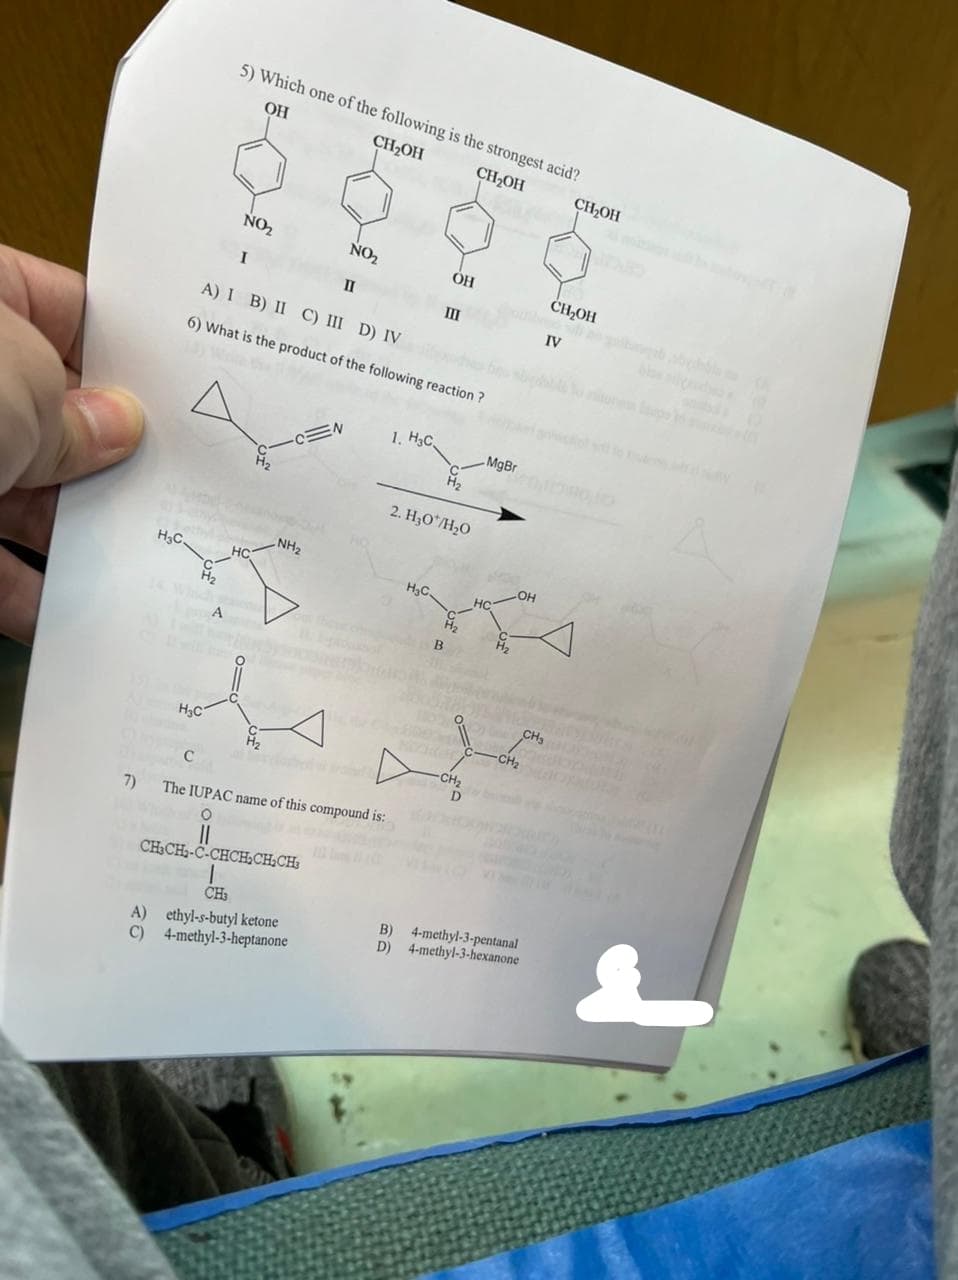 H₂C.
H₂
H₂C
NO₂
II
A) I B) II C) III D) IV
6) What is the product of the following reaction?
5) Which one of the following is the strongest acid?
OH
CH₂OH
CH₂OH
A
NO₂
I
HC
H₂
-CEN
NH₂
CH₂CH₂-C-CHCH₂CH₂CH₂
1
CH3
1. H3C
C
7) The IUPAC name of this compound is:
O
A) ethyl-s-butyl ketone
C) 4-methyl-3-heptanone
H₂C.
OH
III
2. H₂0*/H₂O
B
H₂
GREE
-CH₂
MgBr
H₂
.OH
-CH₂
B) 4-methyl-3-pentanal
D) 4-methyl-3-hexanone
IV
CH₂
CH₂OH
CH₂OH